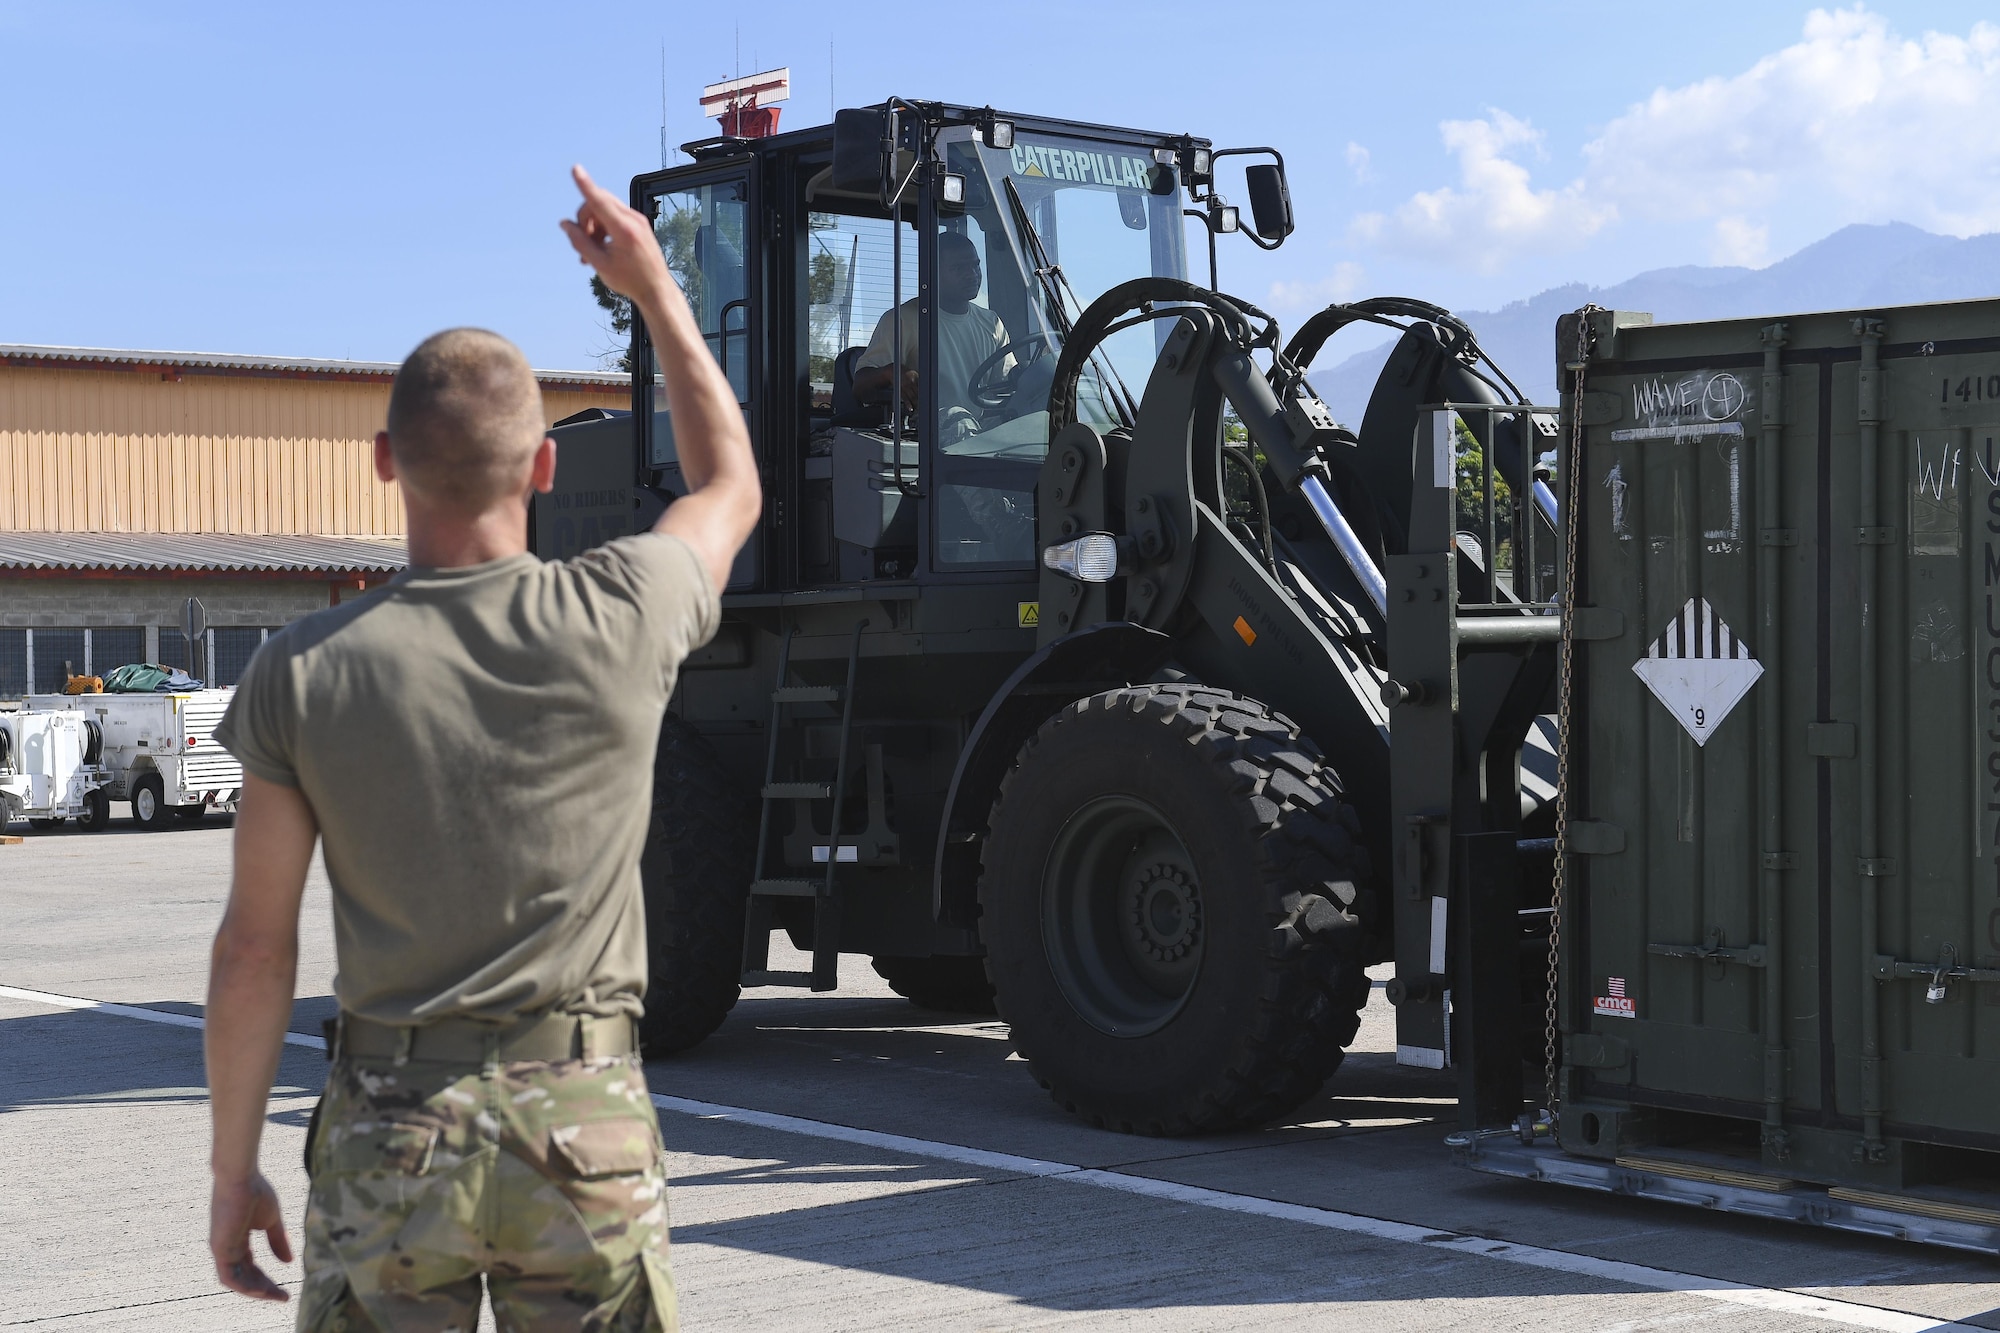 Members of Joint Task Force-Bravo stage equipment at Soto Cano Air Base, Honduras, Oct. 6, 2016, prior to loading onto an aircraft headed to Haiti to support the ongoing Hurricane Matthew disaster relief efforts. Approximately 200 Soldiers, Airmen and Marines from Special Purpose Marine Air-Ground Task Force-Southern Command and Joint Task Force-Bravo deployed this week with two CH-53E Super Stallion, three CH-47 Chinook, and two UH-60L and two HH-60L Black Hawk helicopters to provide heavy and medium lift to support the U.S. Agency for International Development-led mission.